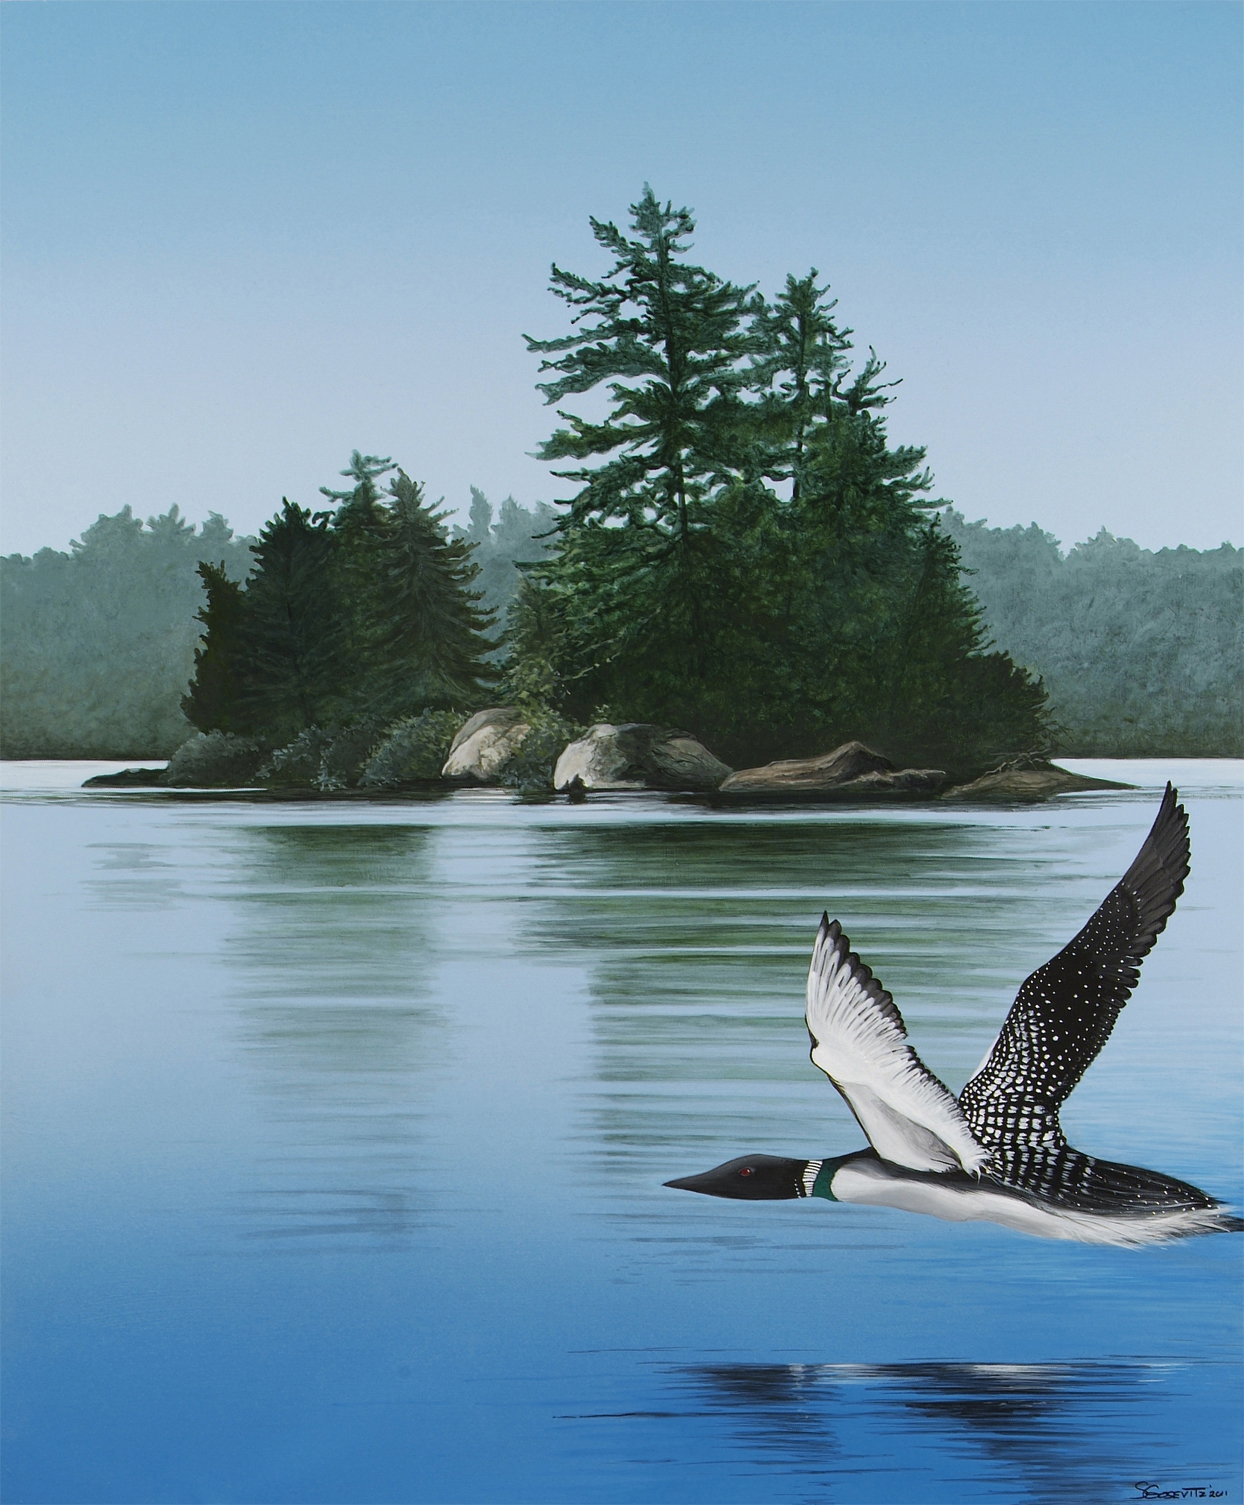 Lake Rosseau island lake scene blues greens with Canada Geese flying up front